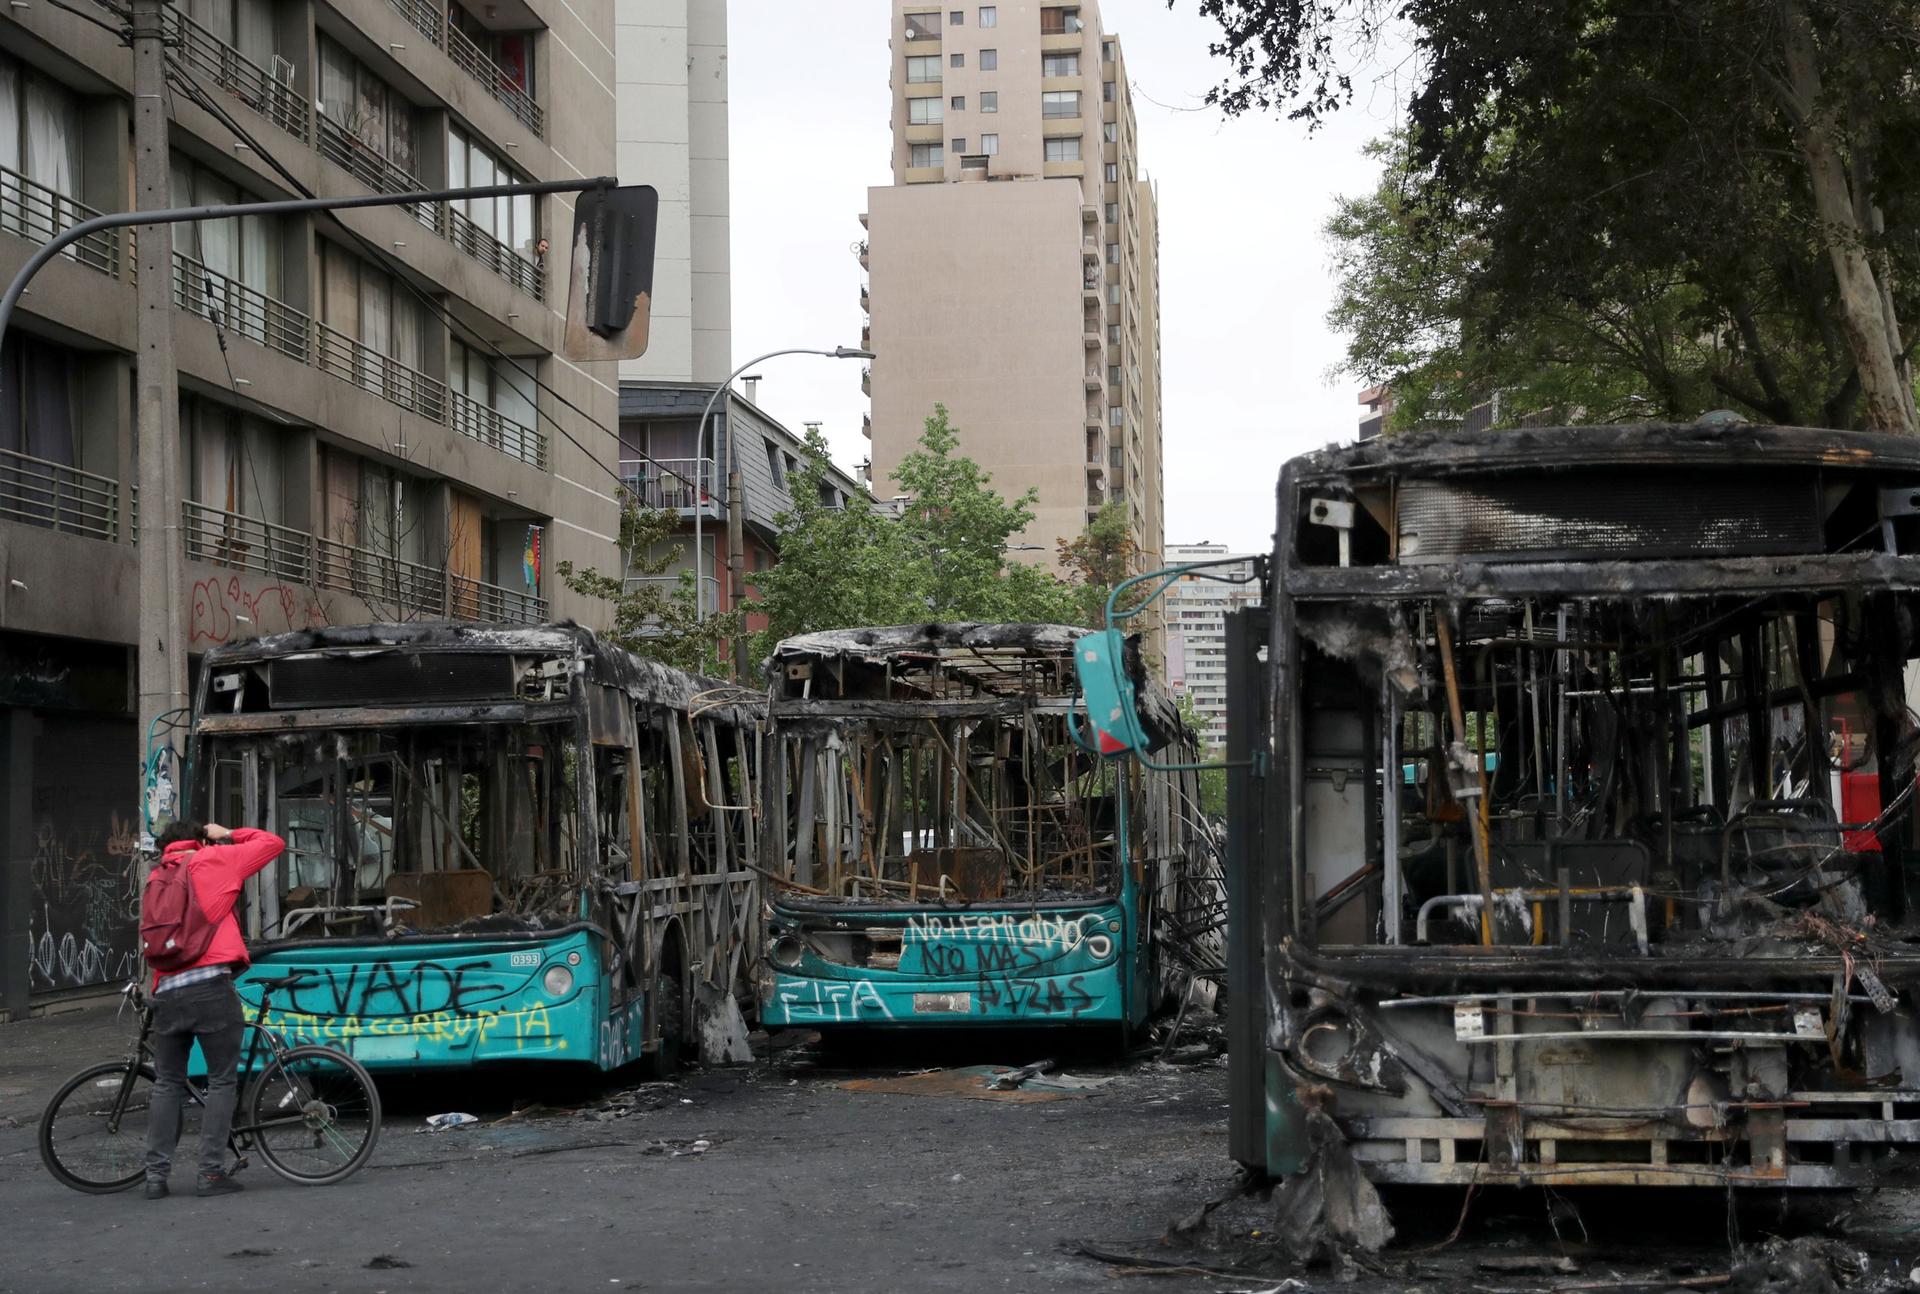 A man is shown with a bicycle standing in front of three totally burned out buses in a street.